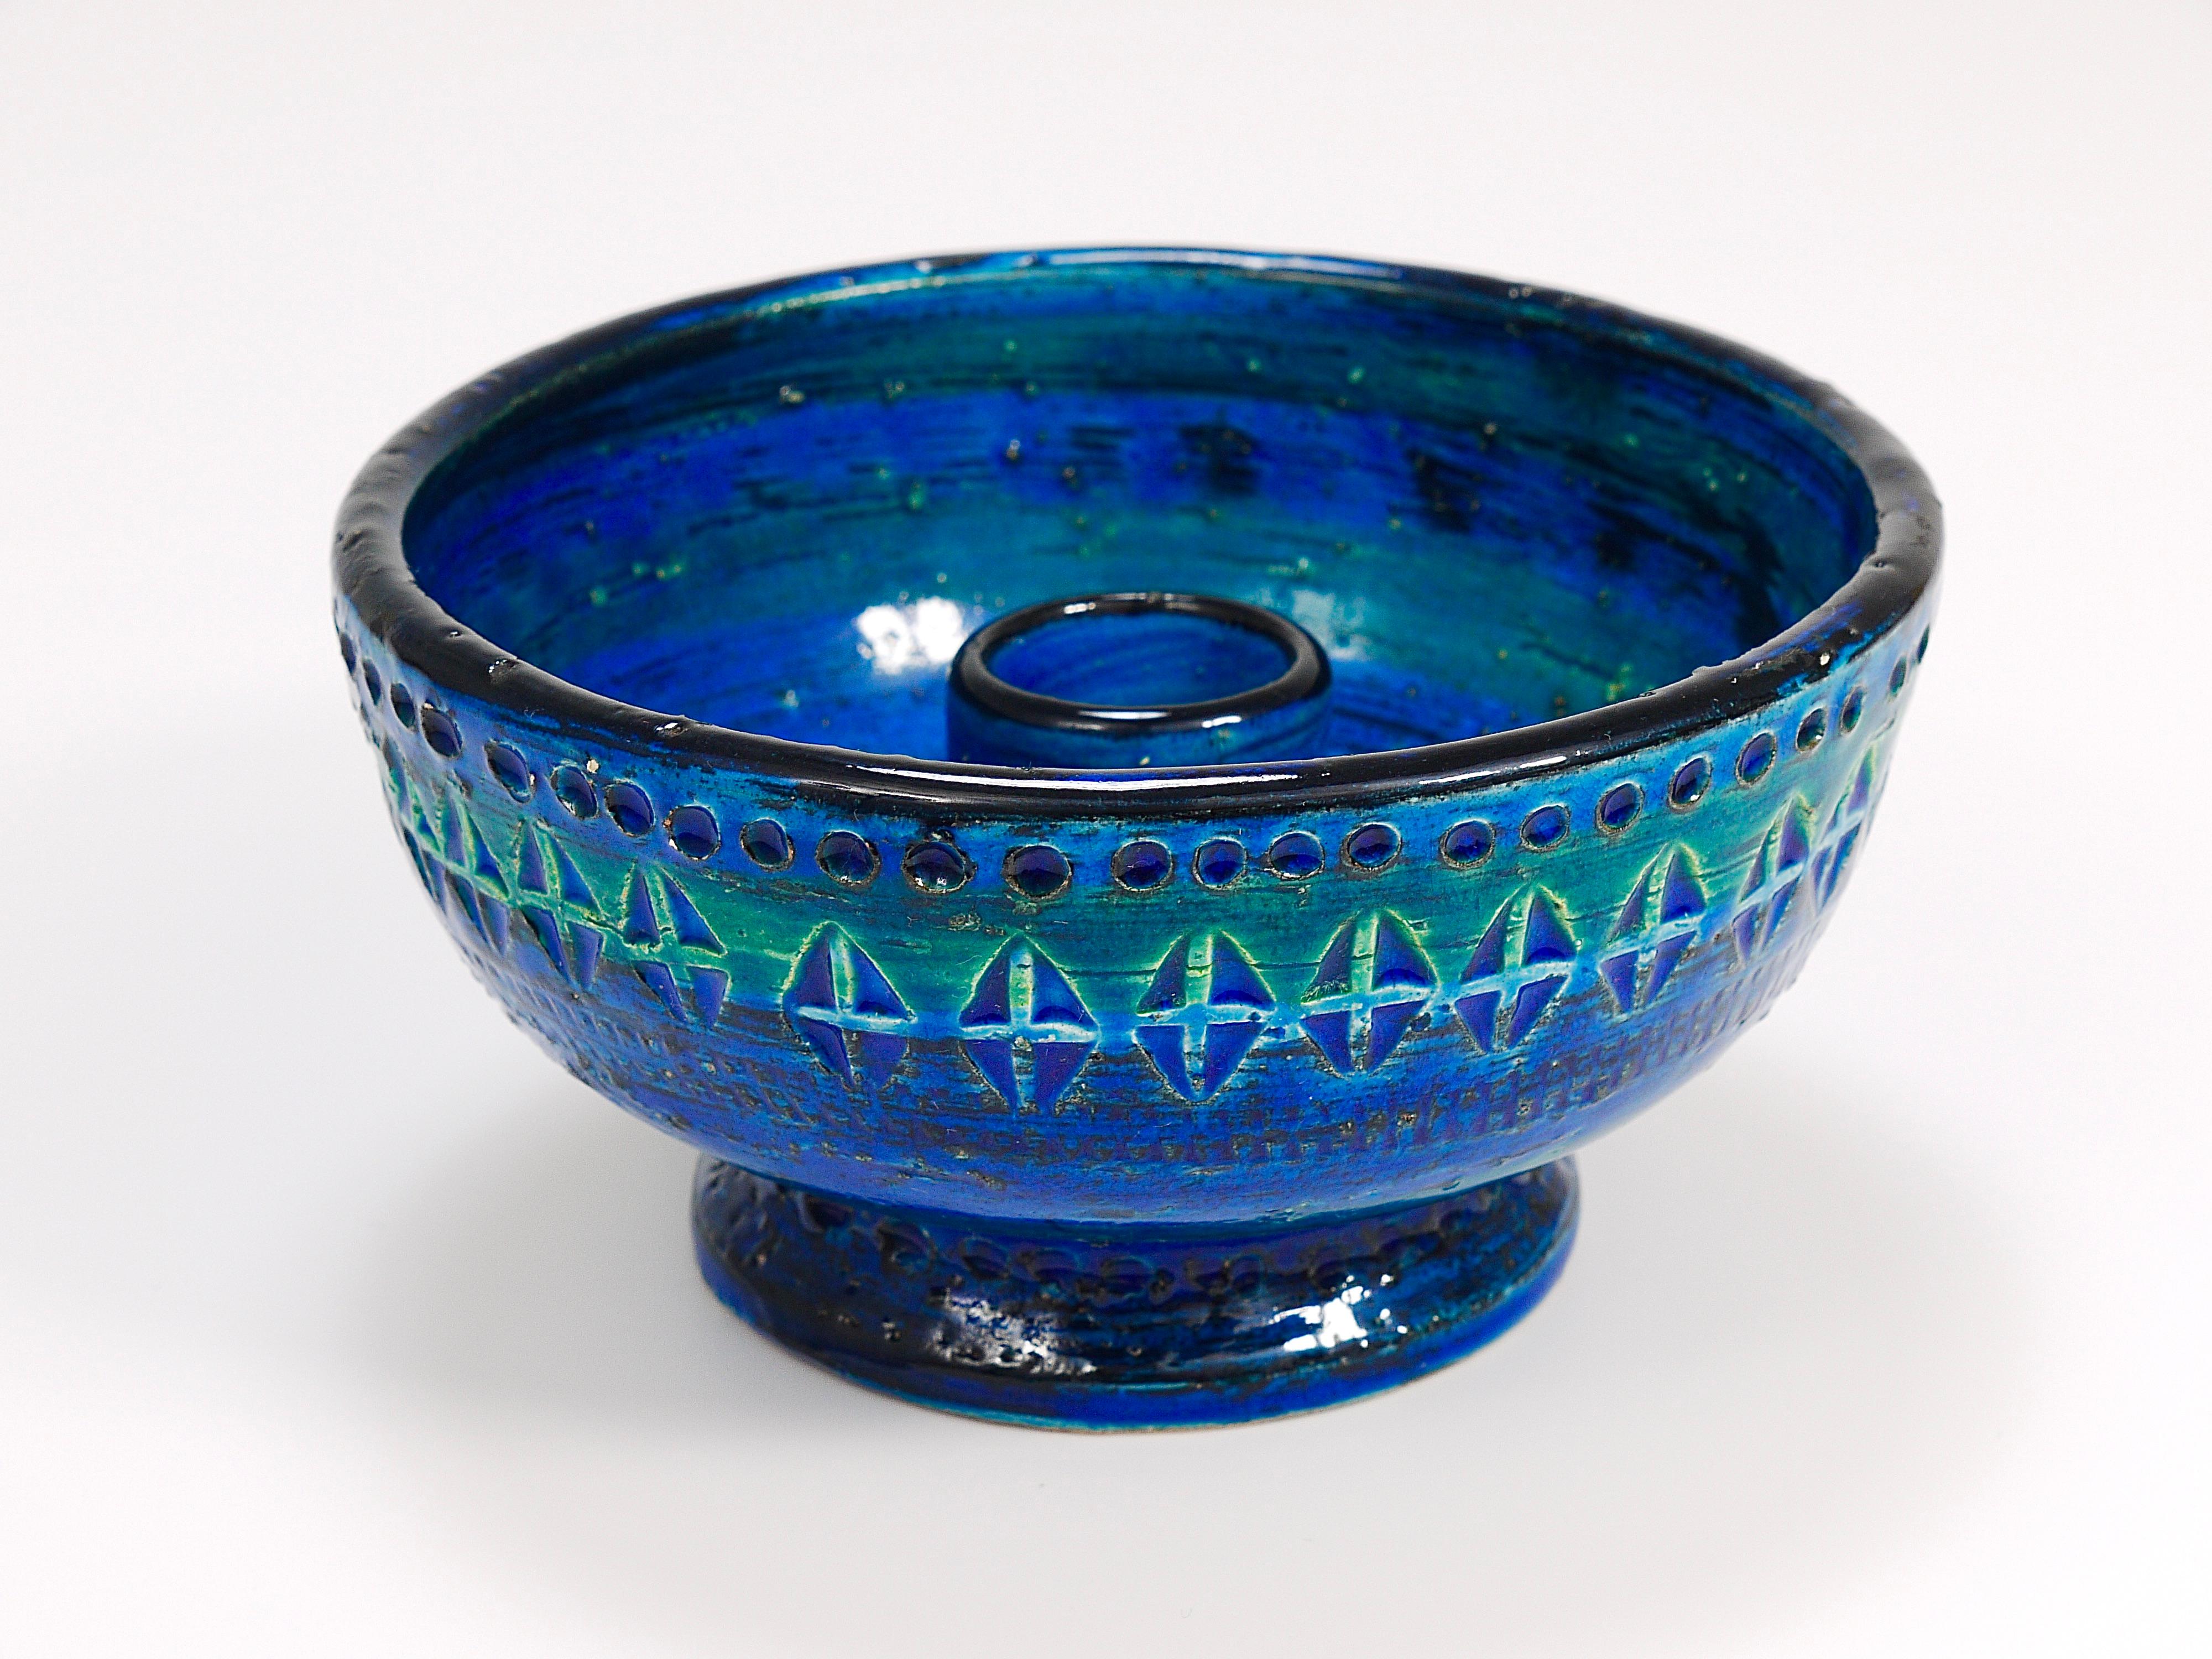 Aldo Londi Bitossi Rimini Blue Glazed Midcentury Candle Holder Bowl, 1950s In Good Condition For Sale In Vienna, AT